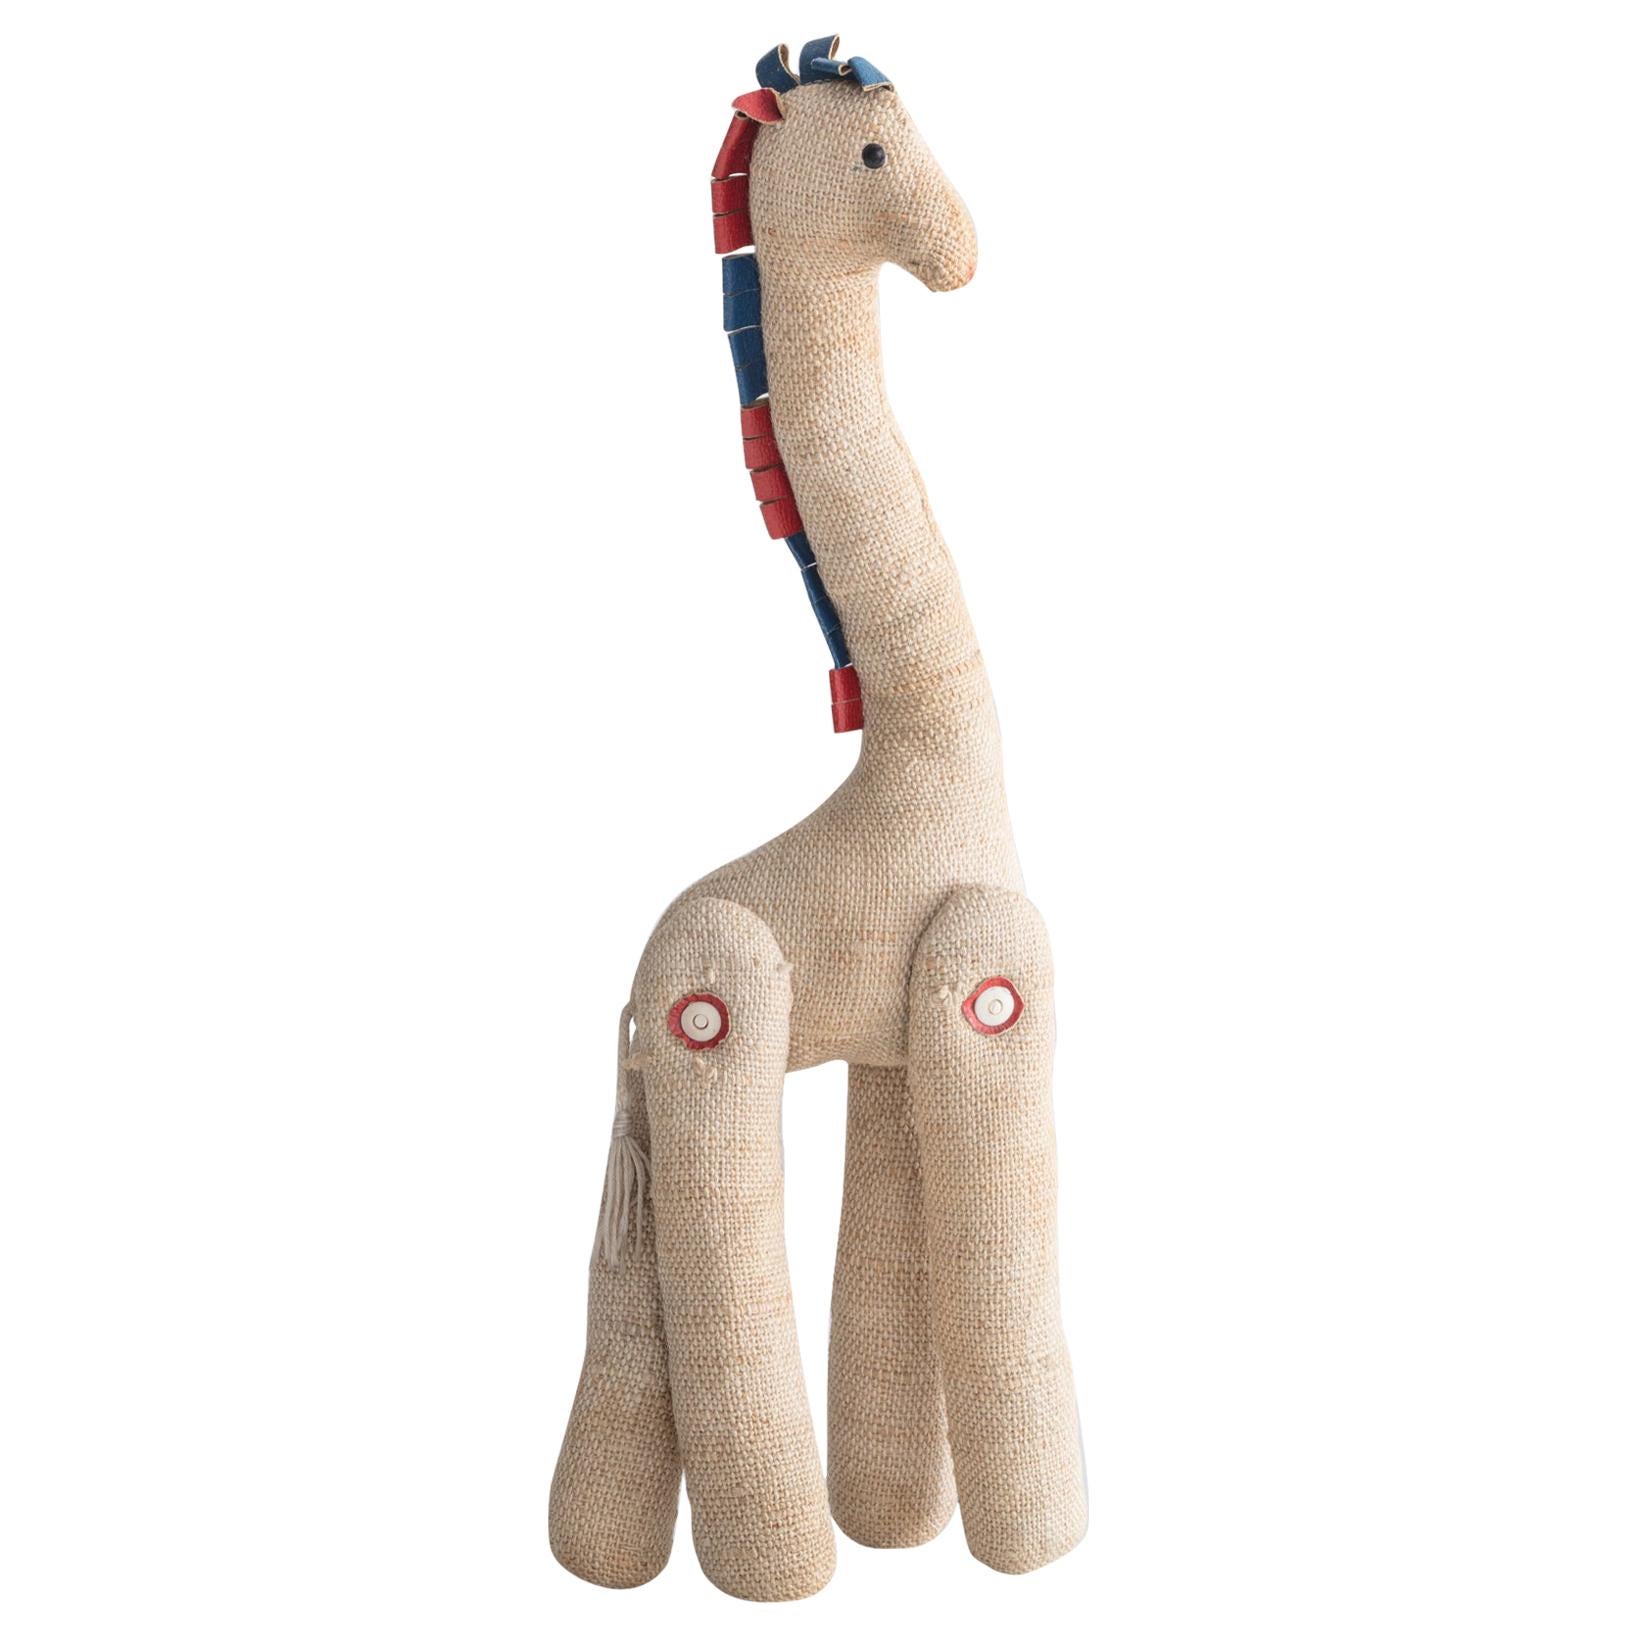 Therapeutic Giraffe Toy in Jute and Leather by Renate Müller, circa 1968 For Sale